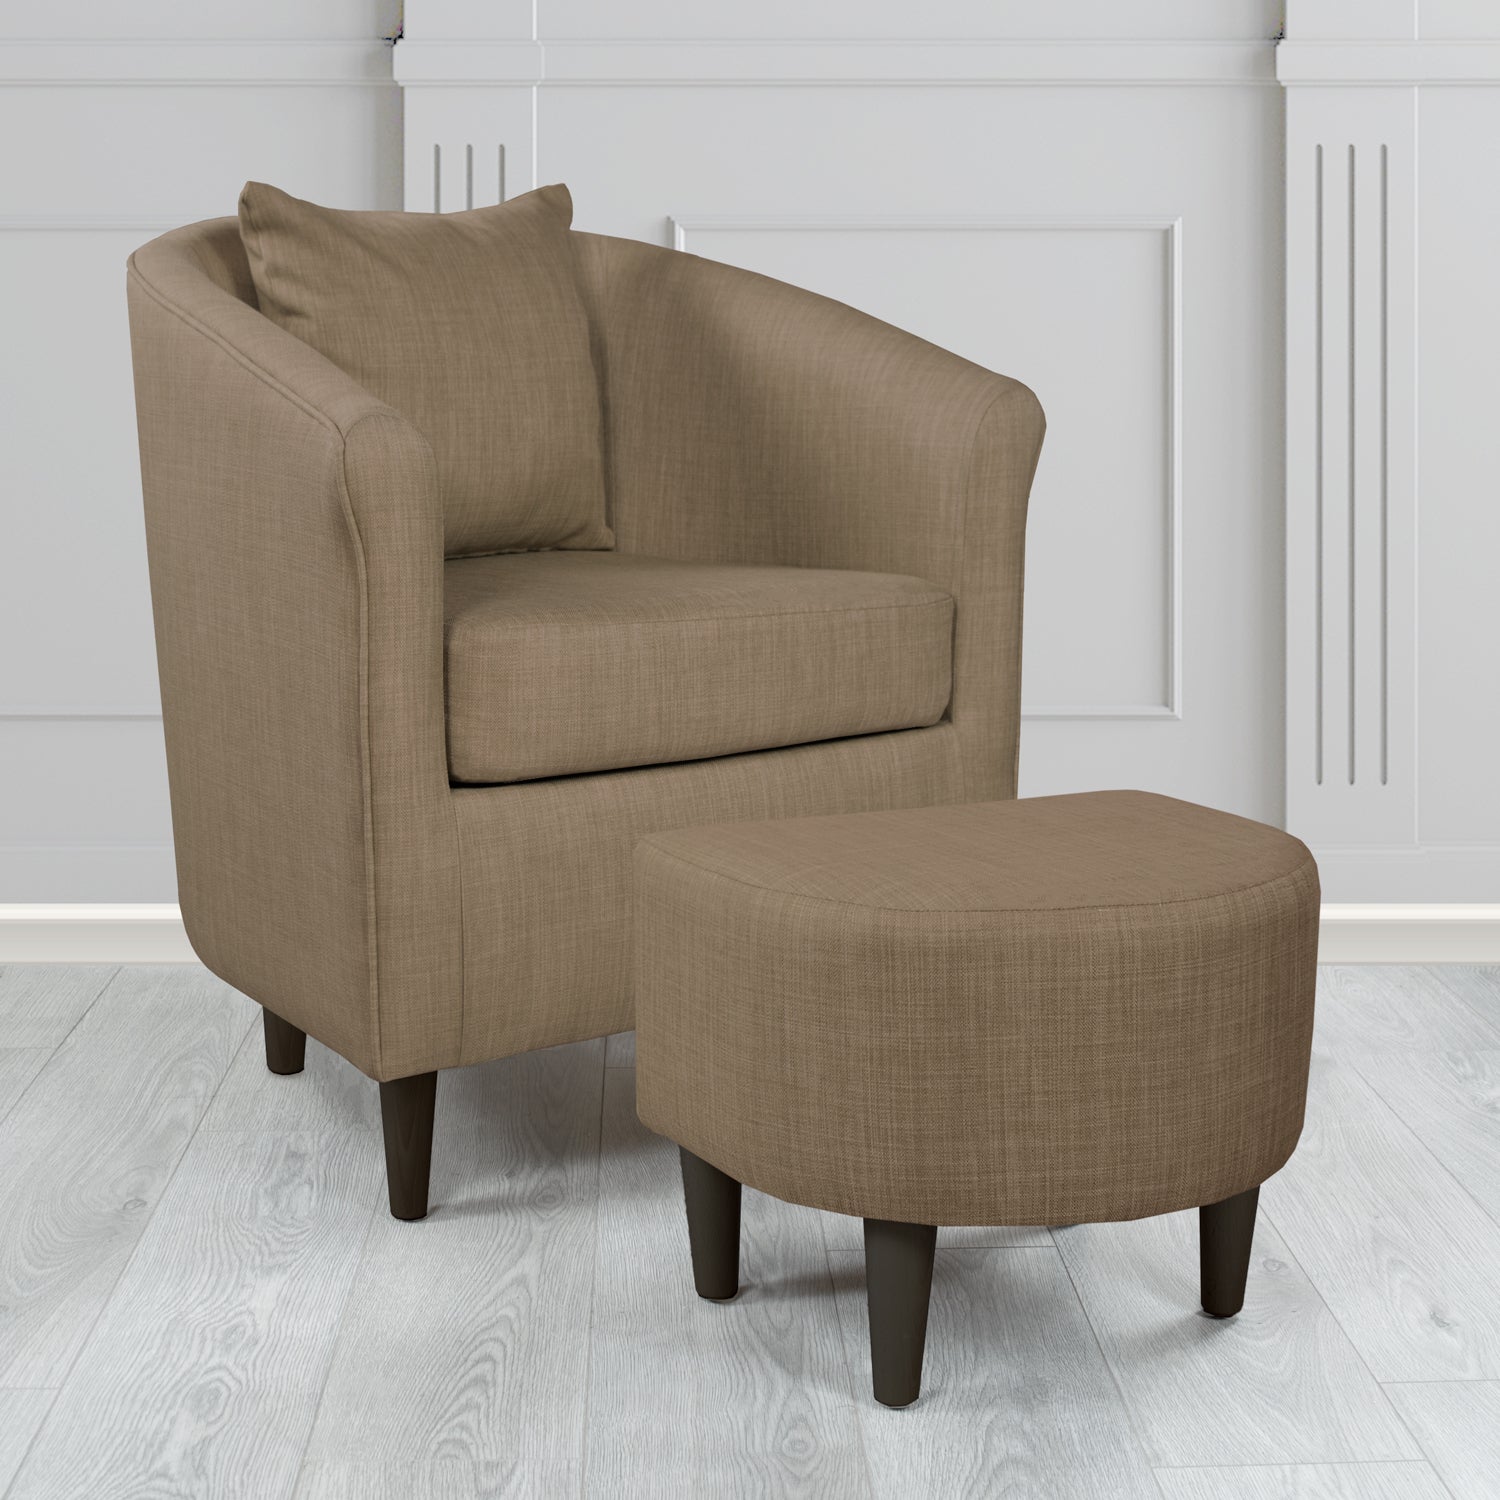 St Tropez Charles Nutmeg Plain Linen Fabric Tub Chair & Footstool Set with Scatter Cushion - The Tub Chair Shop